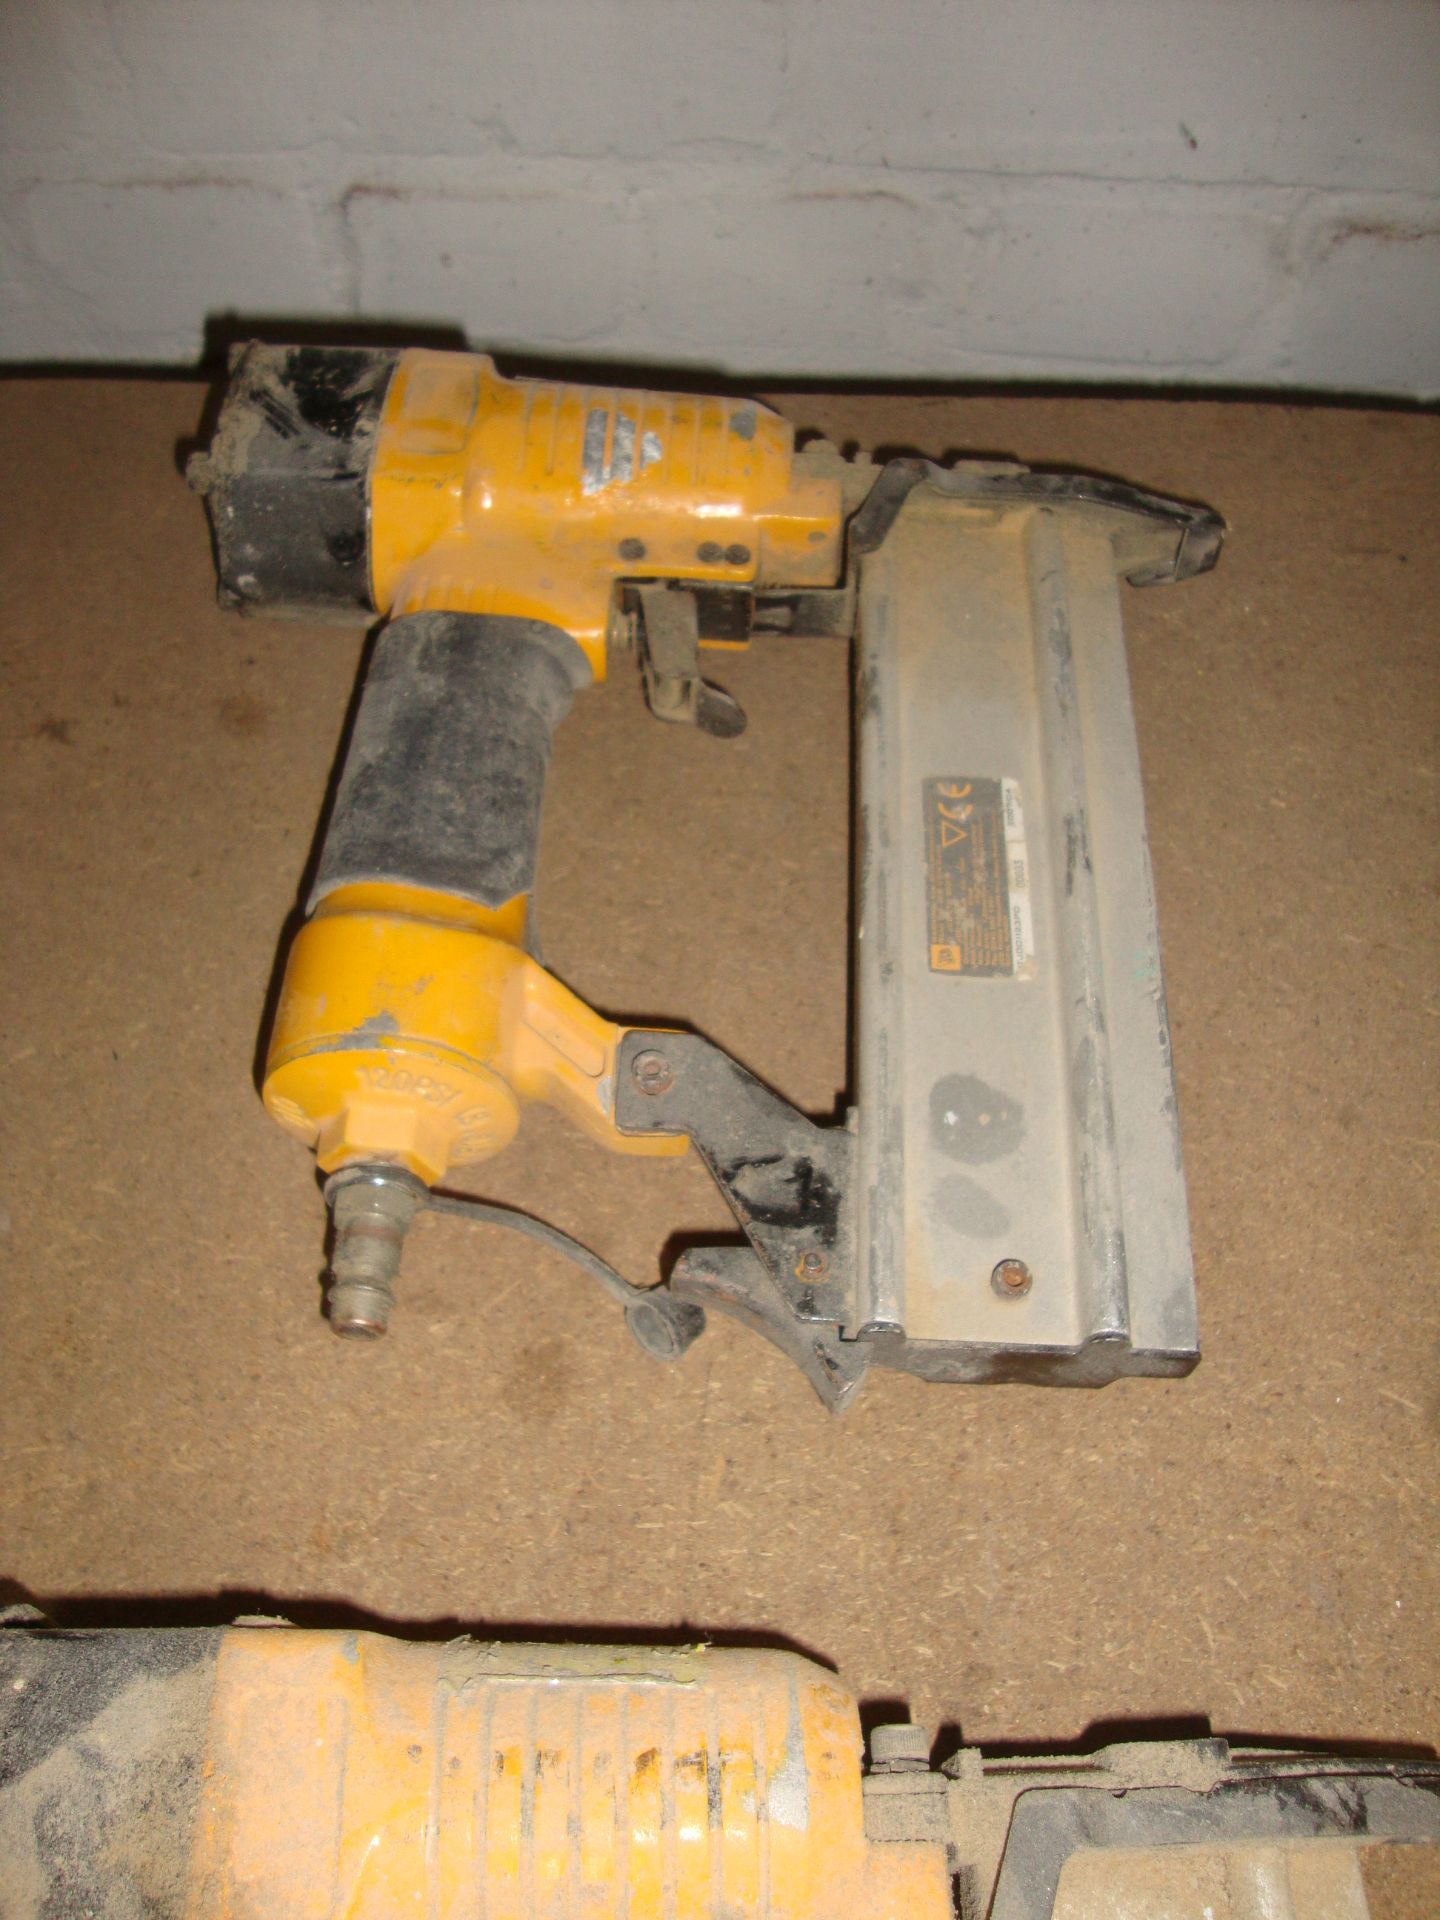 2 off JCB air nailers IMPORTANT: Please remember goods successfully bid upon must be paid for and - Image 2 of 2